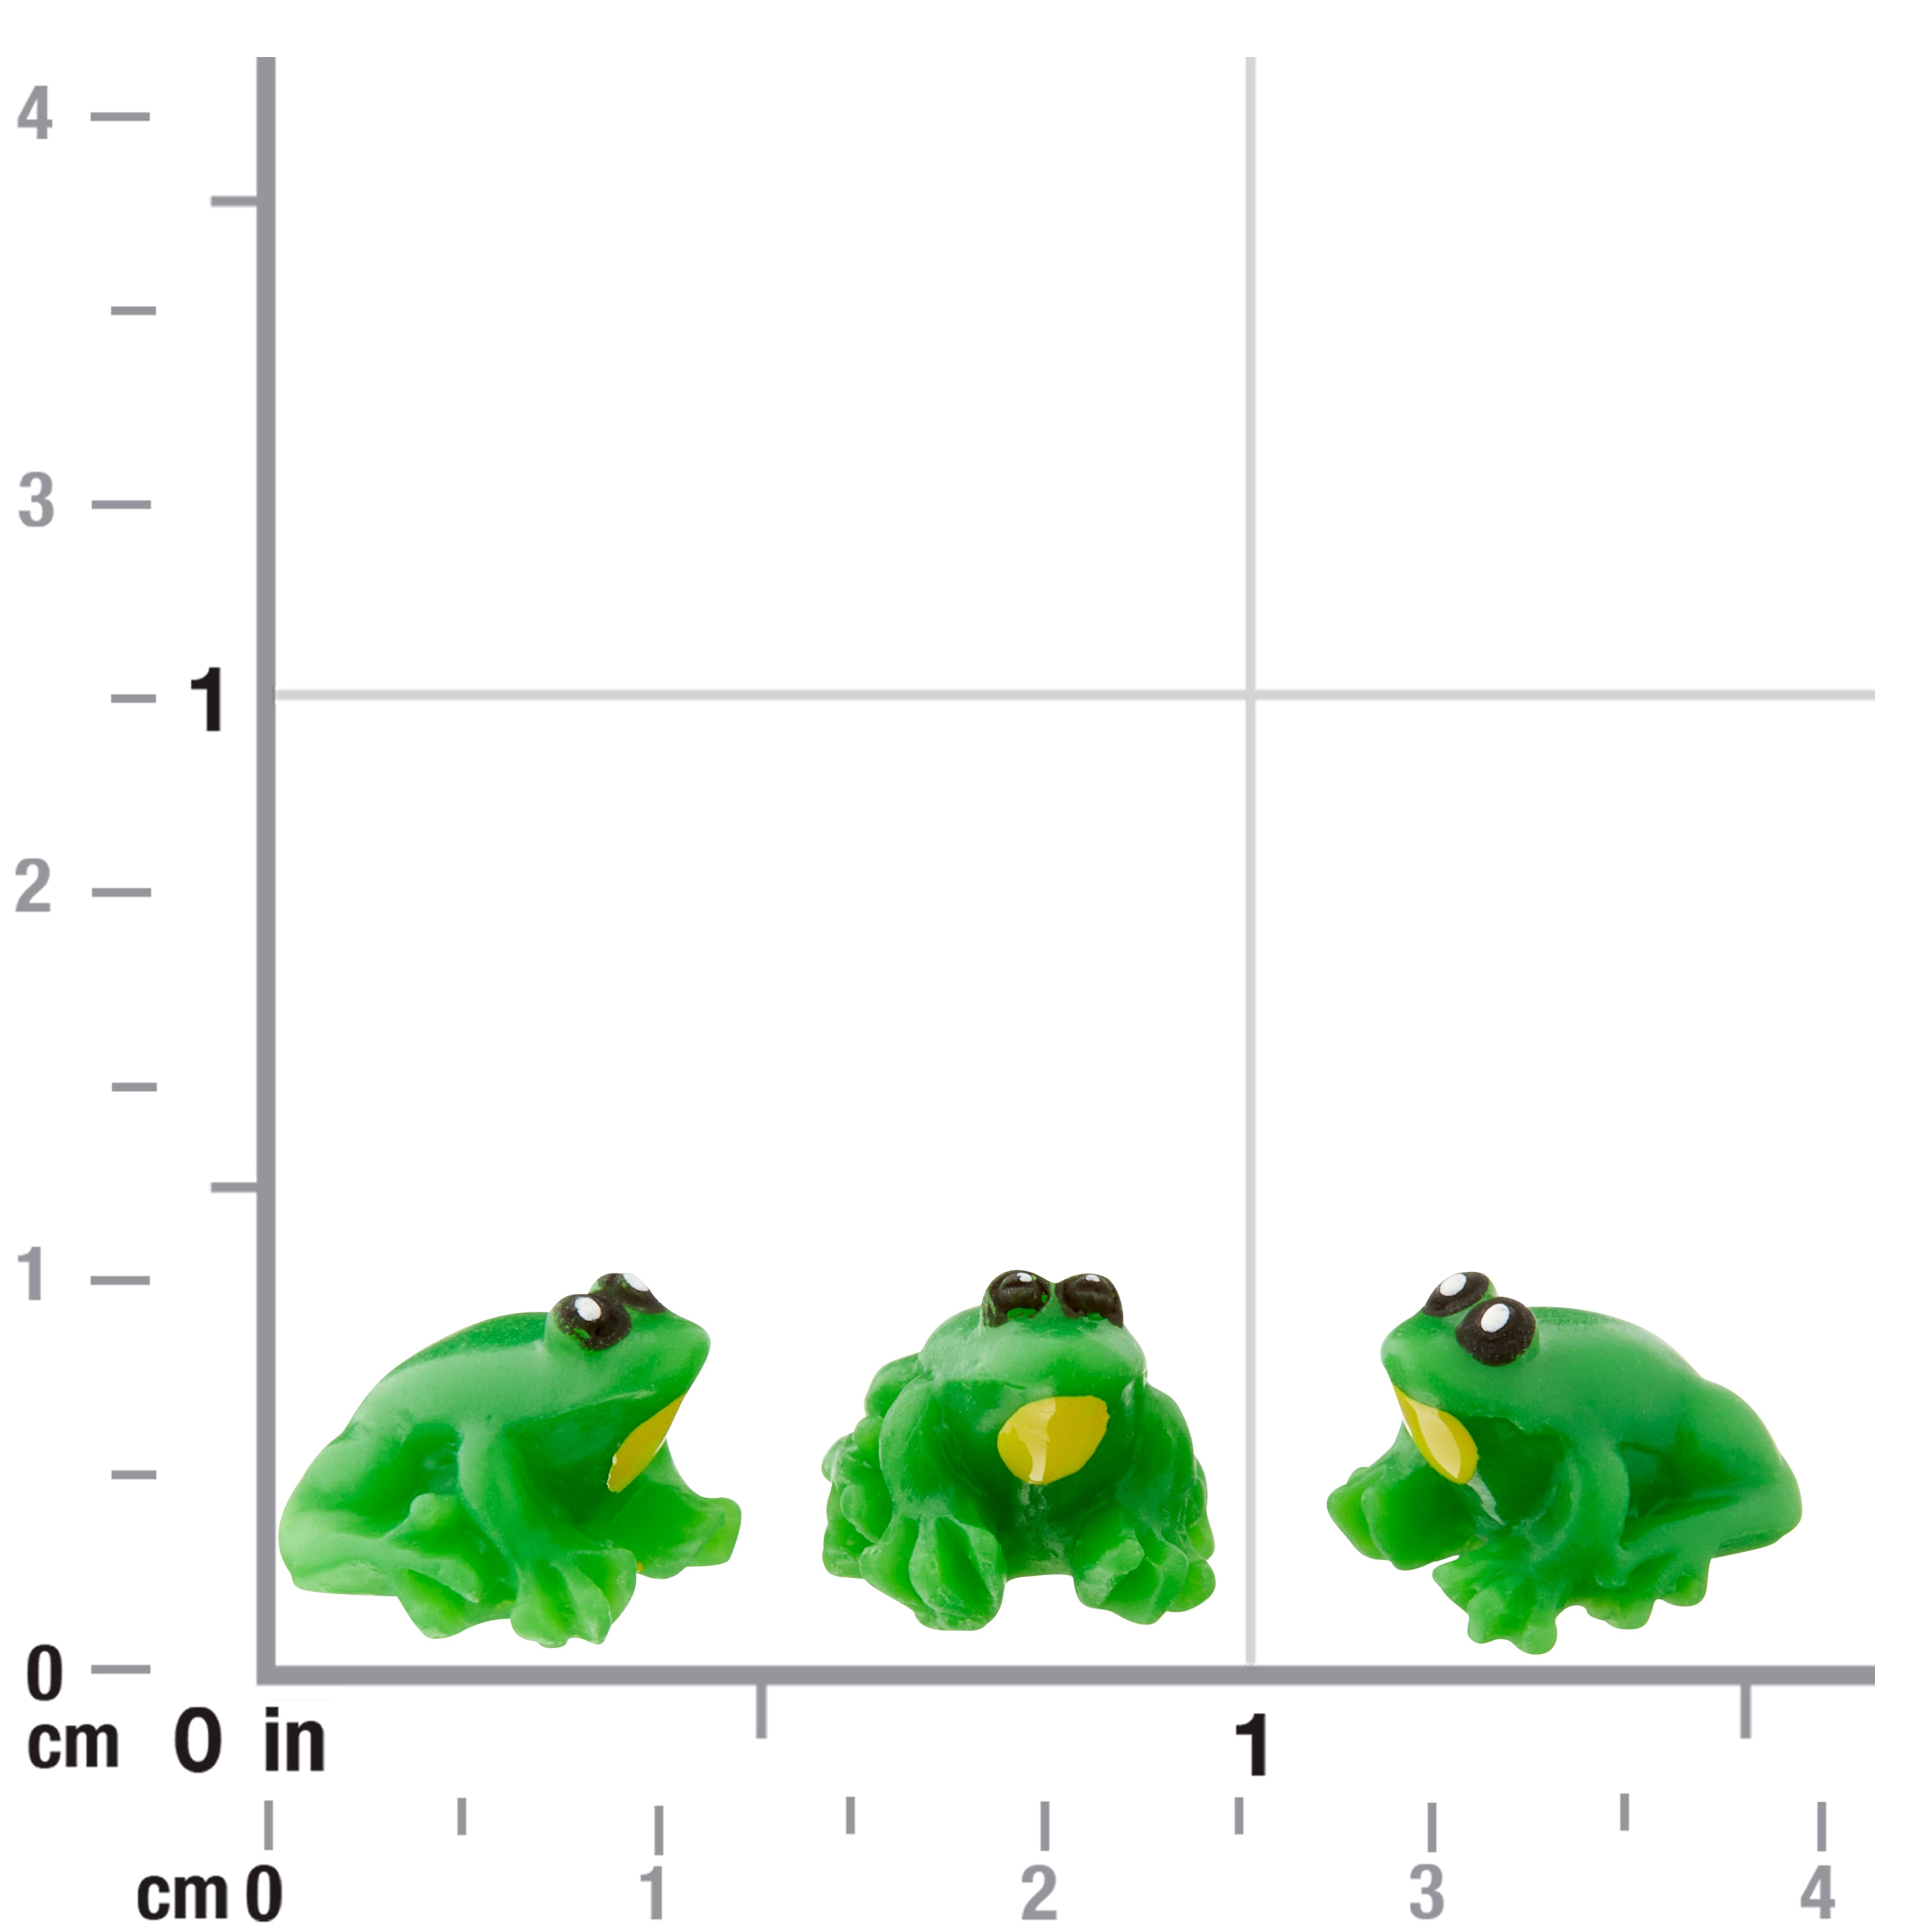 Mini Sitting Frogs by Make Market in Green | 0.375 x 0.5 x 0.5 | Michaels